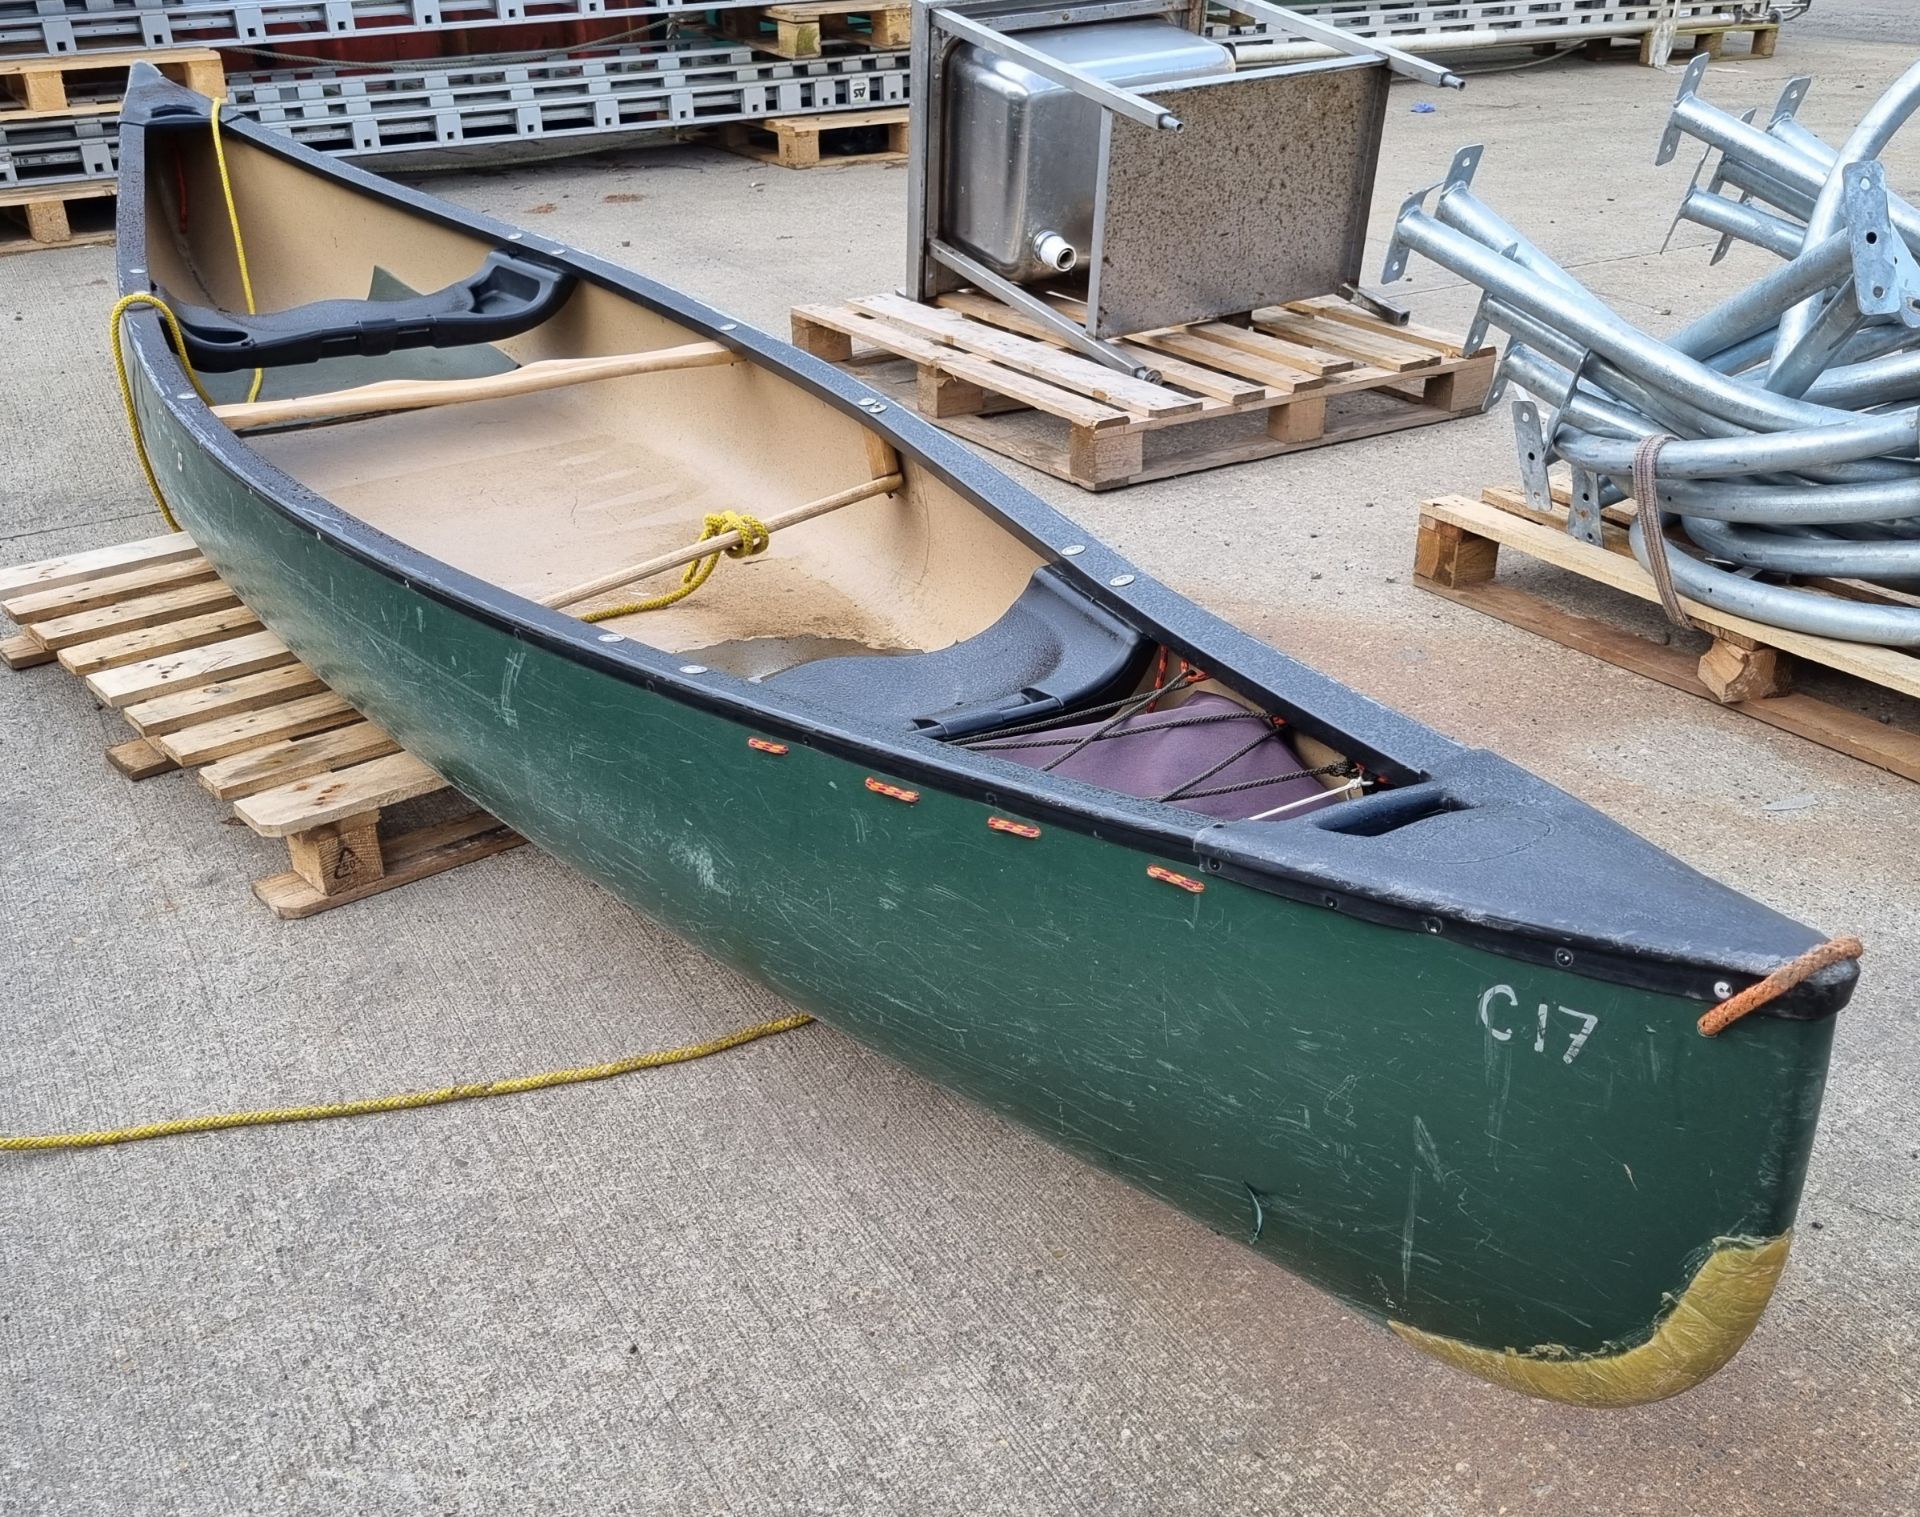 Discovery 158 green canoe - L 490 x W 100 x H 45 cm - Image 5 of 7